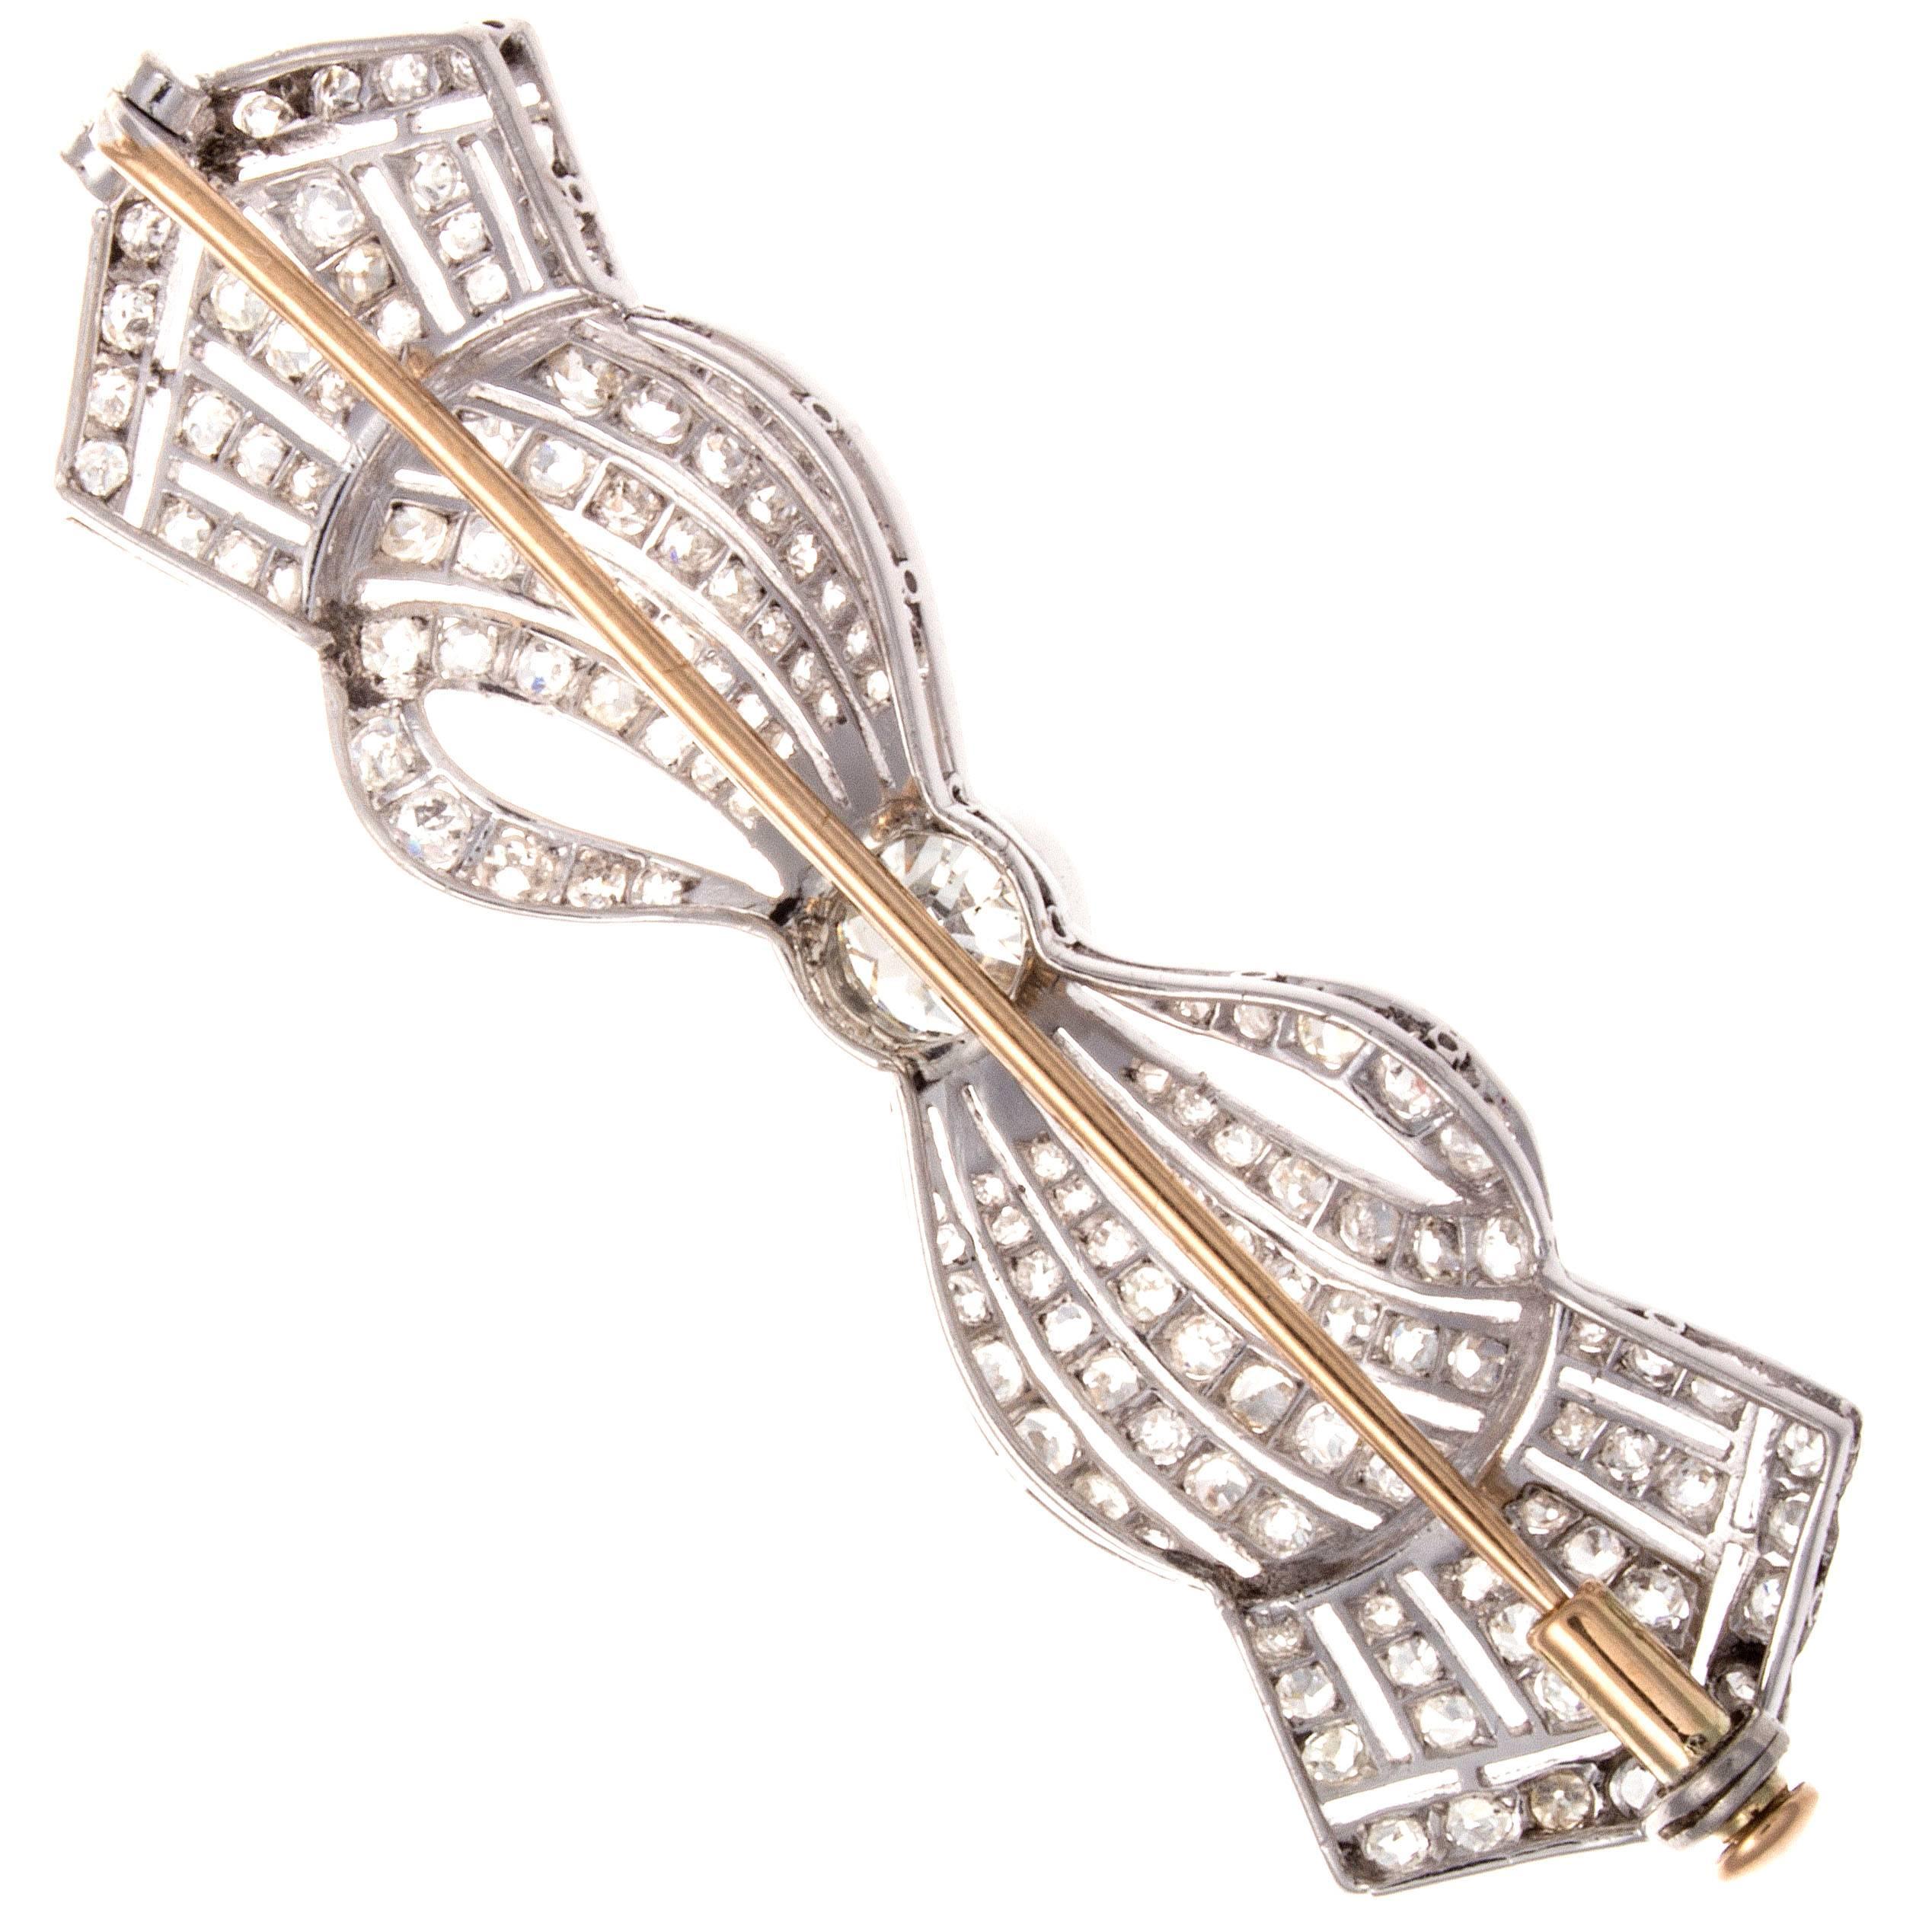 A smooth rhythmic art deco designed brooch that flows with fabric like ease. With an old European cut clean, white center diamond that weighs approximately 0.65 carats and is accented by 140 old cut diamonds weighing approximately 3.00 carats. Hand